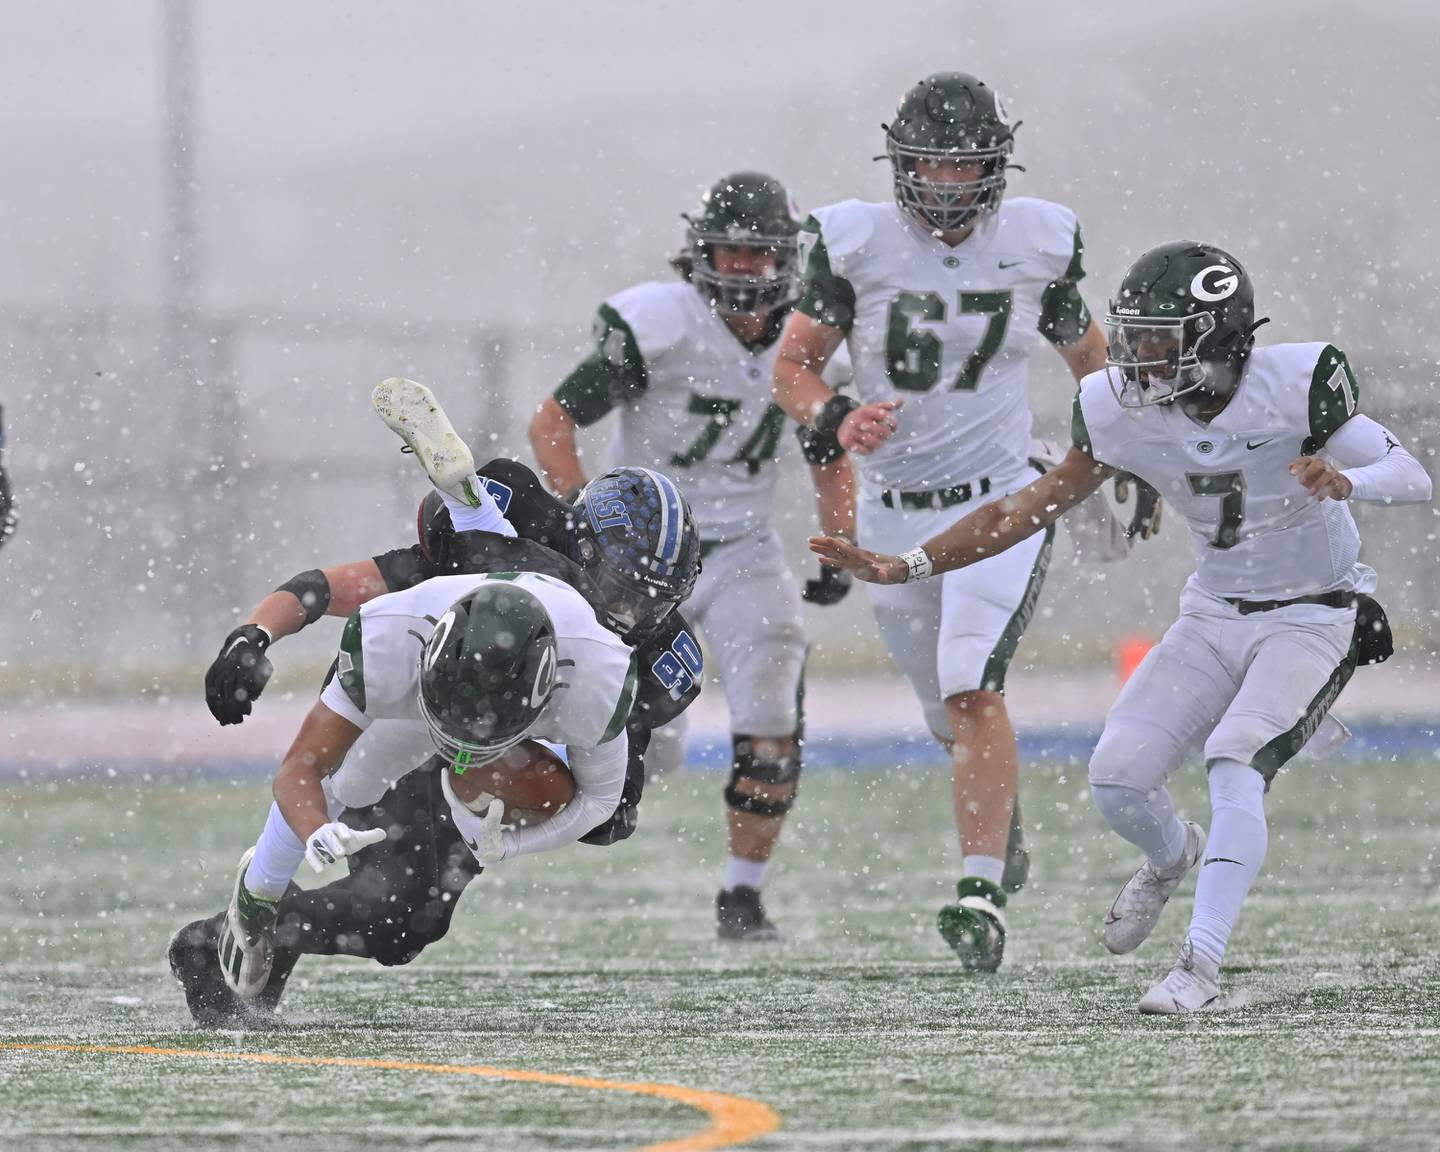 Lincoln-Way East's David Wuske (90) tackles Glenbard West's Julius Ellens (4) during the IHSA Class 8A semifinals on Saturday, November 19, 2022, at Frankfort.